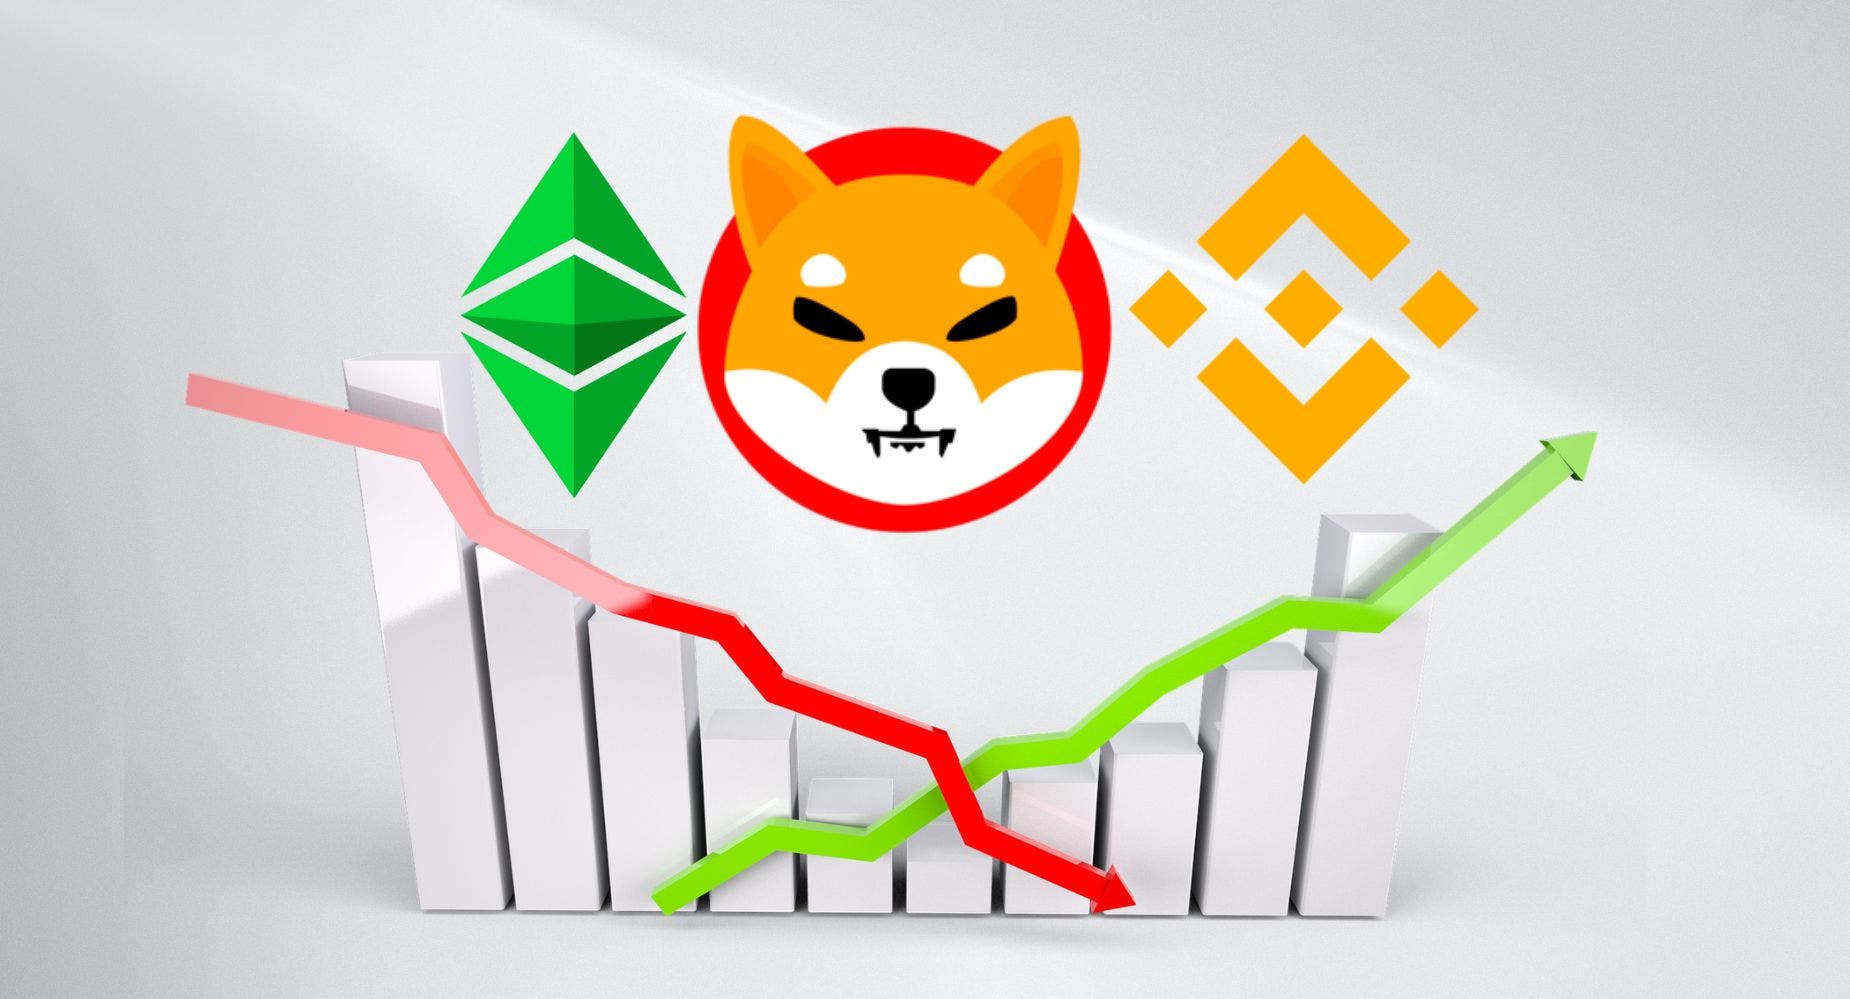 Binance Coin, Ethereum Classic, Shiba Inu Stage Strong Rebounds: What's Happening?